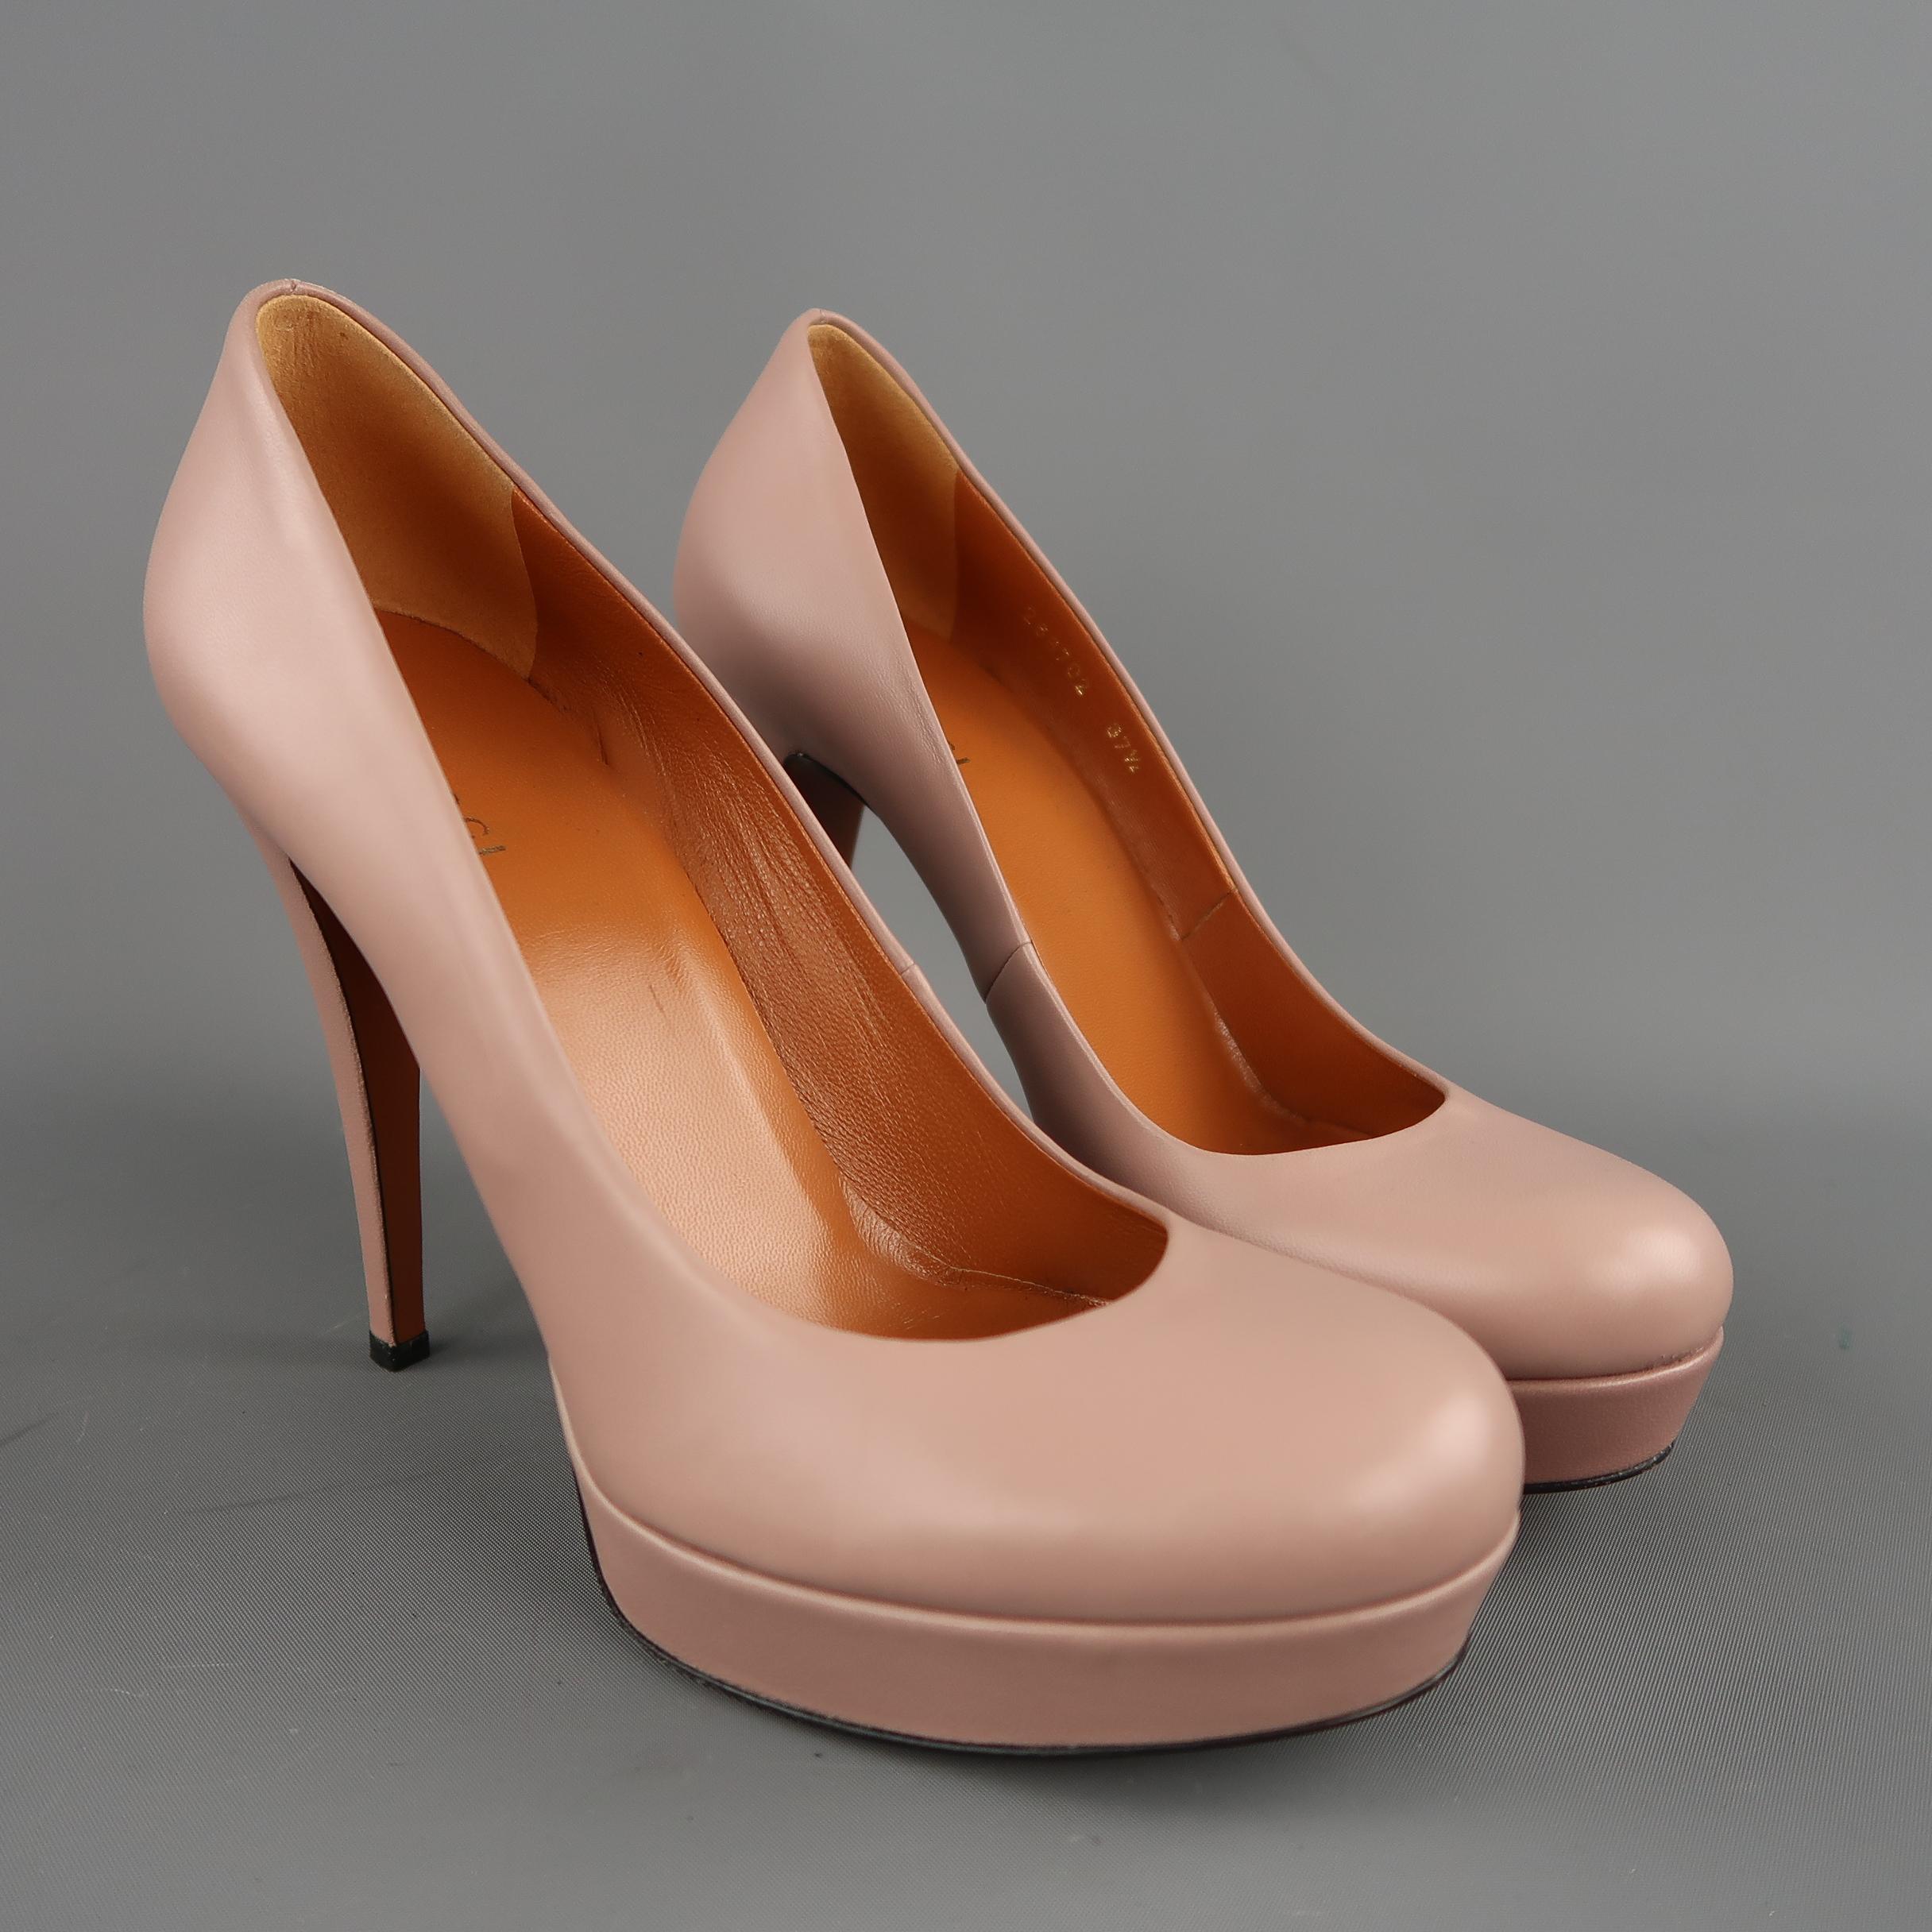 Classic GUCCI pumps come in muted pink leather with a round toe, covered platform, and covered stiletto heel. With box. Made in Italy.
 
Excellent Pre-Owned Condition.
Marked: IT 37.5
 
Measurements:
 
Heel: 5 in.
Platform: 0.85 in.